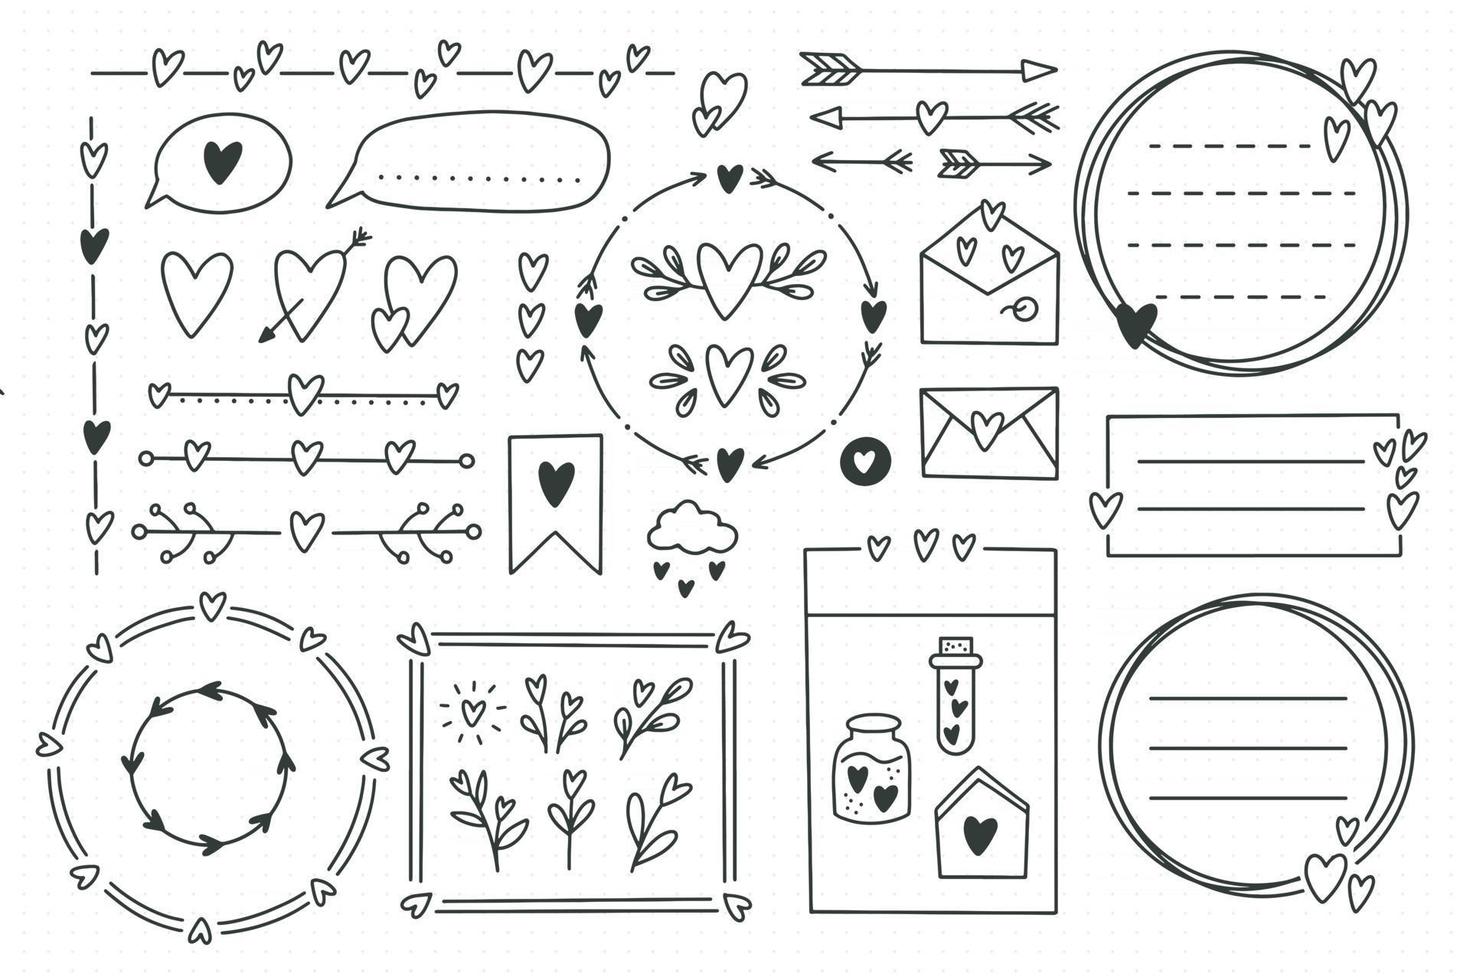 Cute bullet journal element doodles with hearts love theme Hand drawn vector